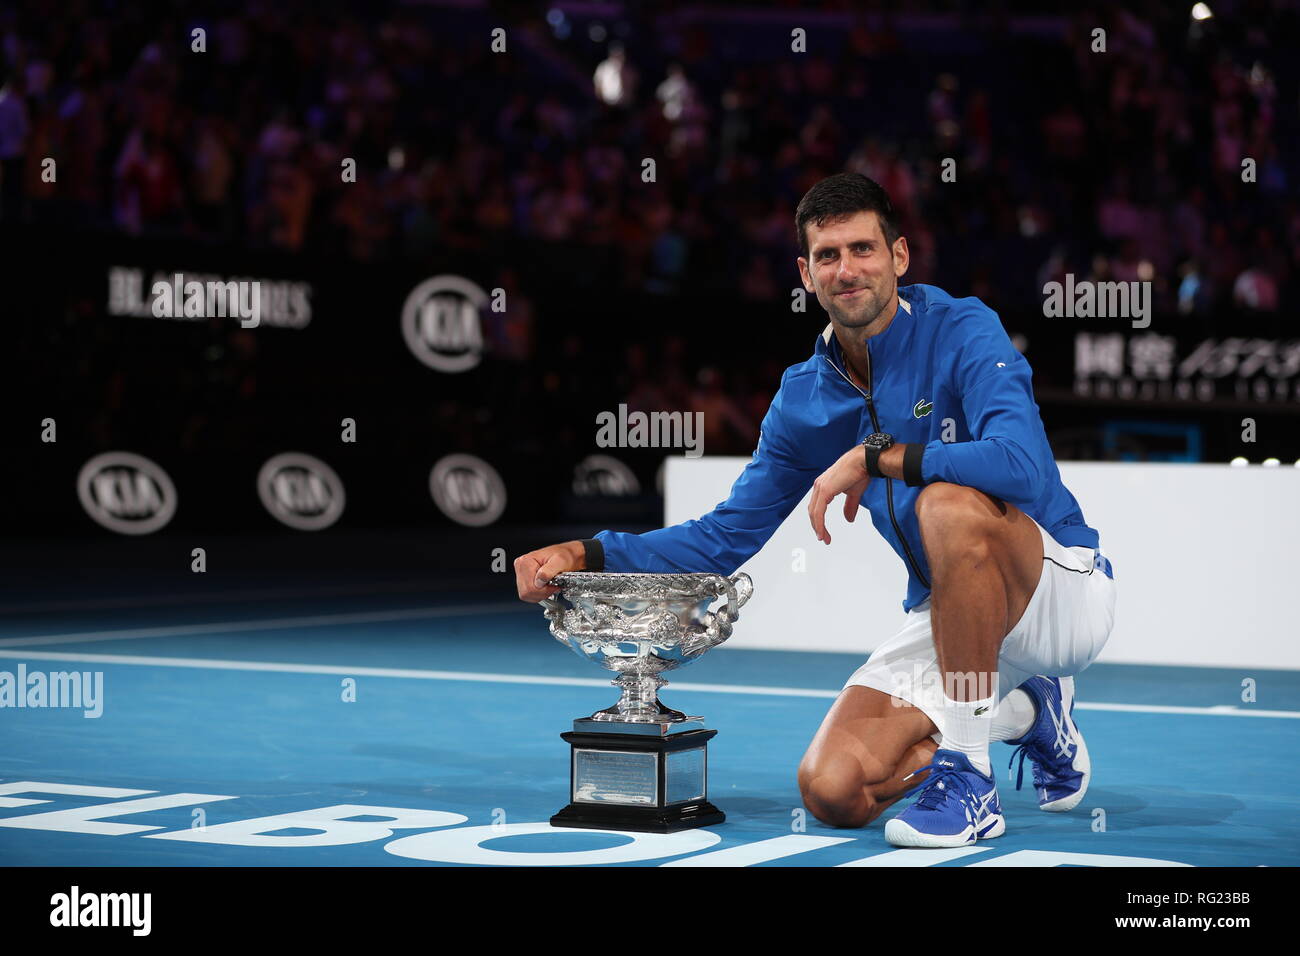 Melbourne, Australia. 27th Jan, 2019. Novak Djokovic of Serbia poses during  the trophy awarding ceremony after the men's singles final match against  Rafael Nadal of Spain at 2019 Australian Open in Melbourne,